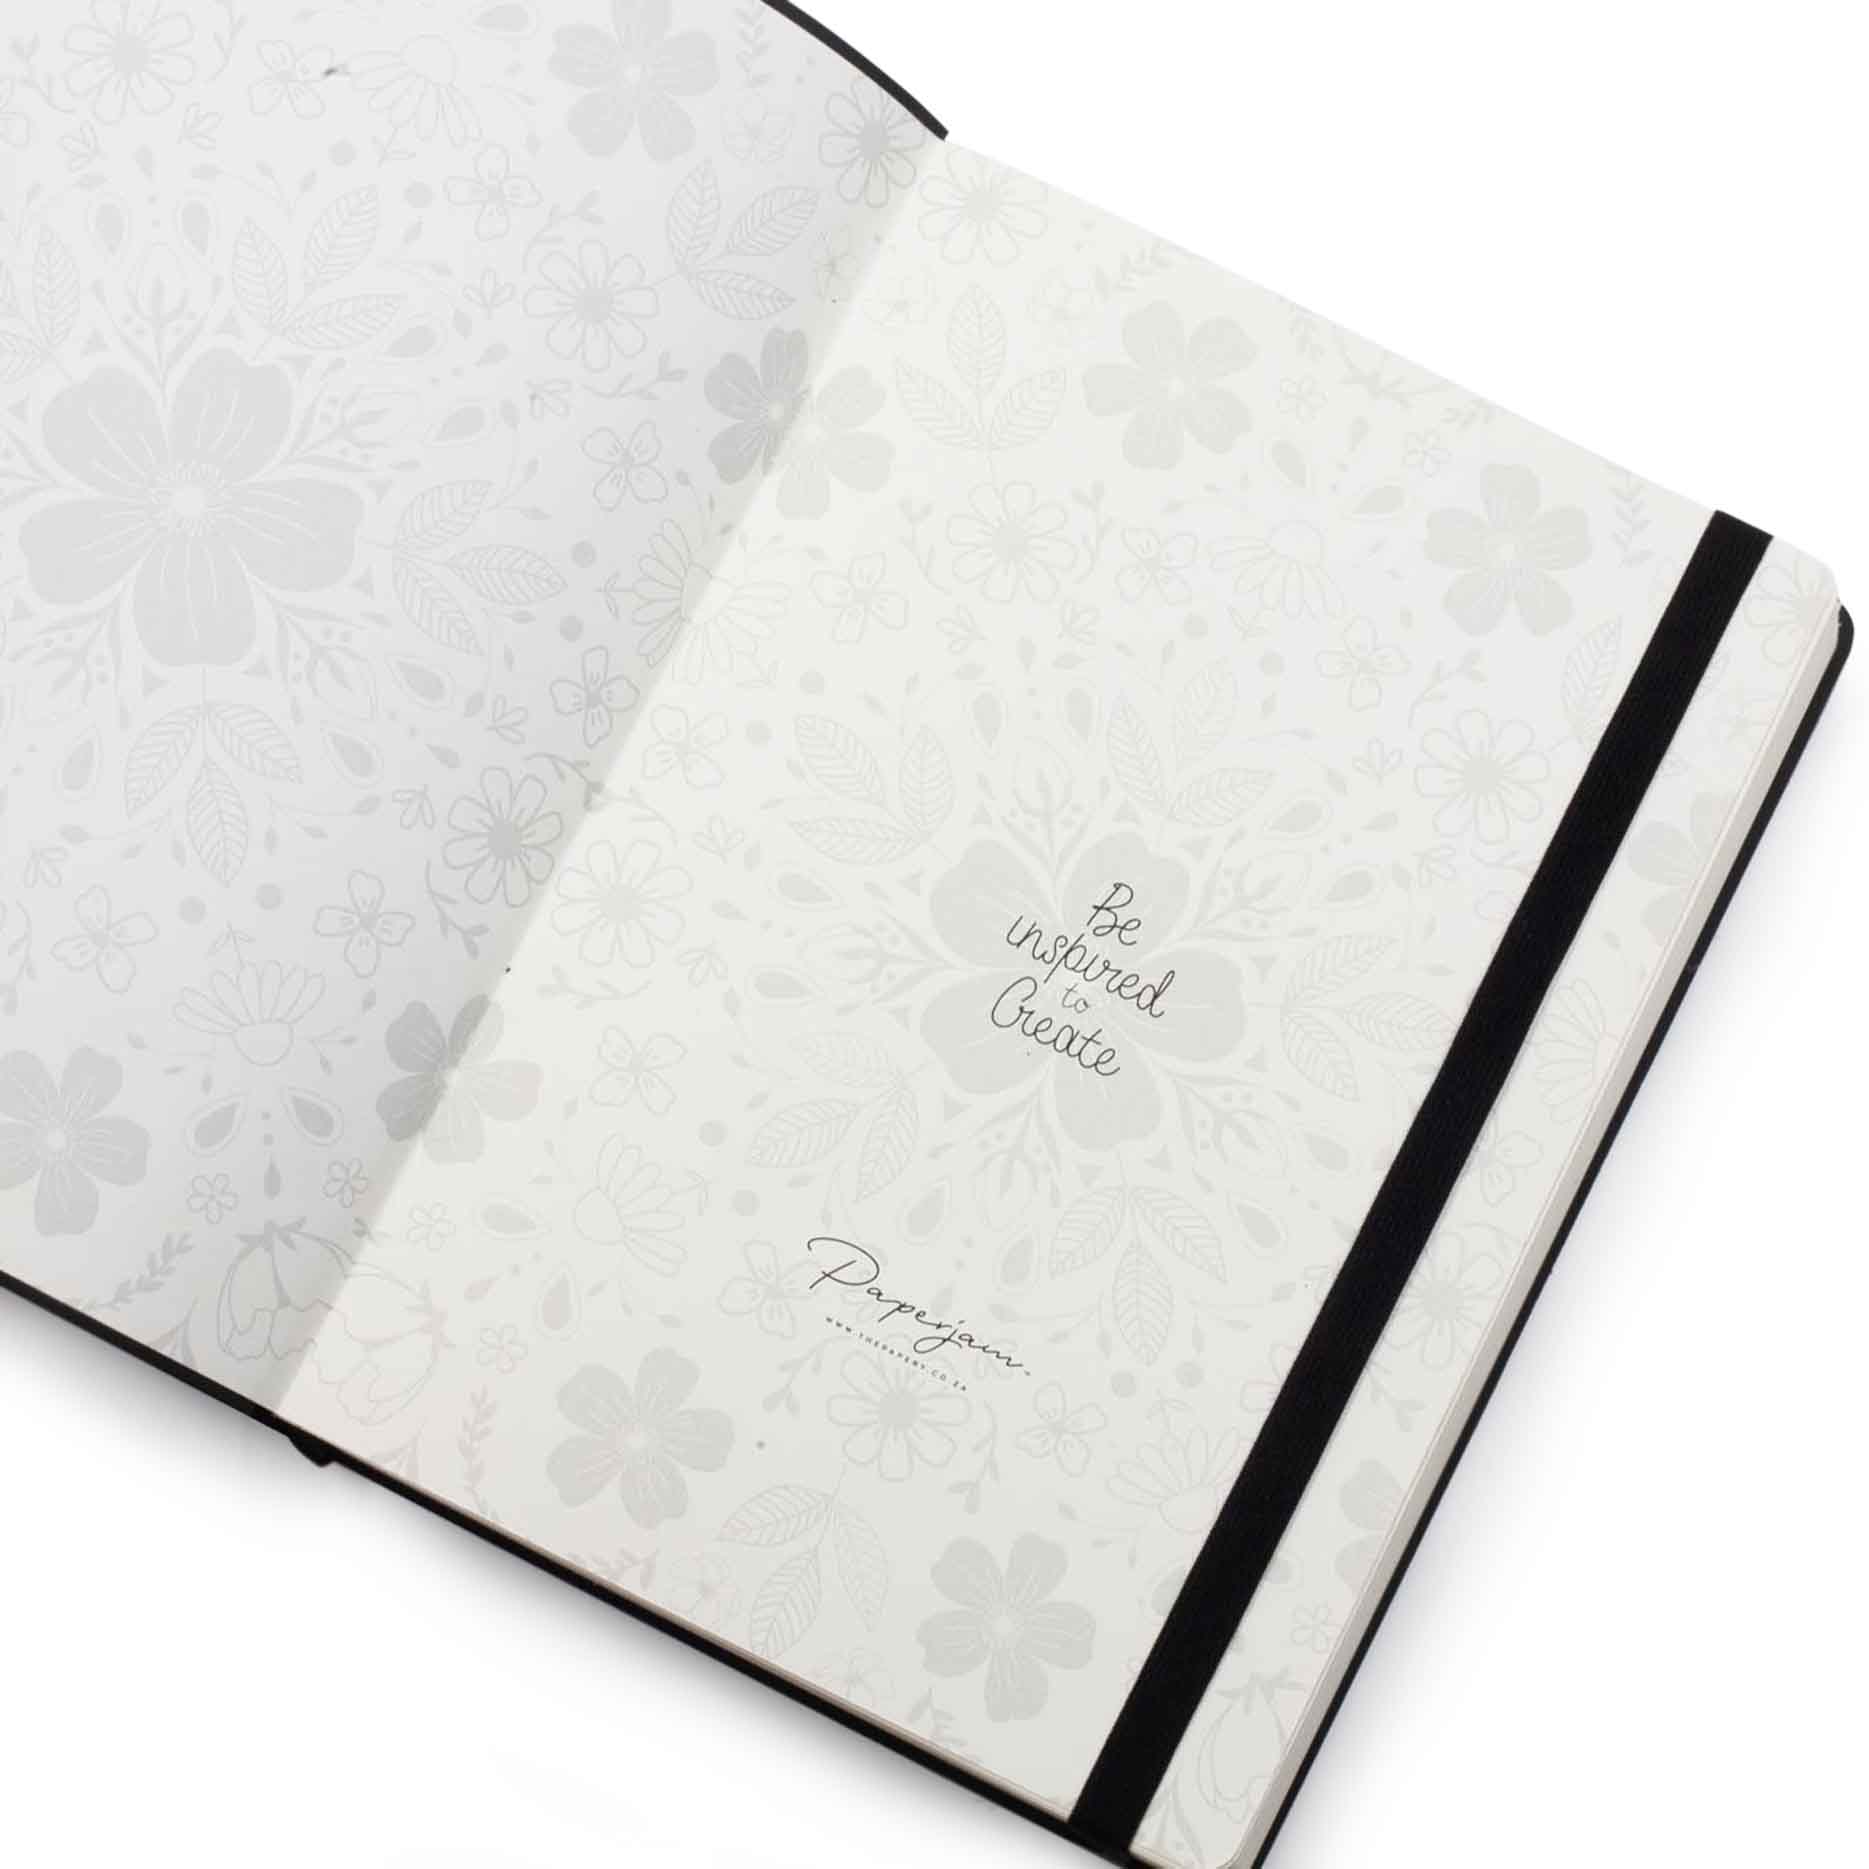 Image shows the endpapers of a black Flexi Premium journal